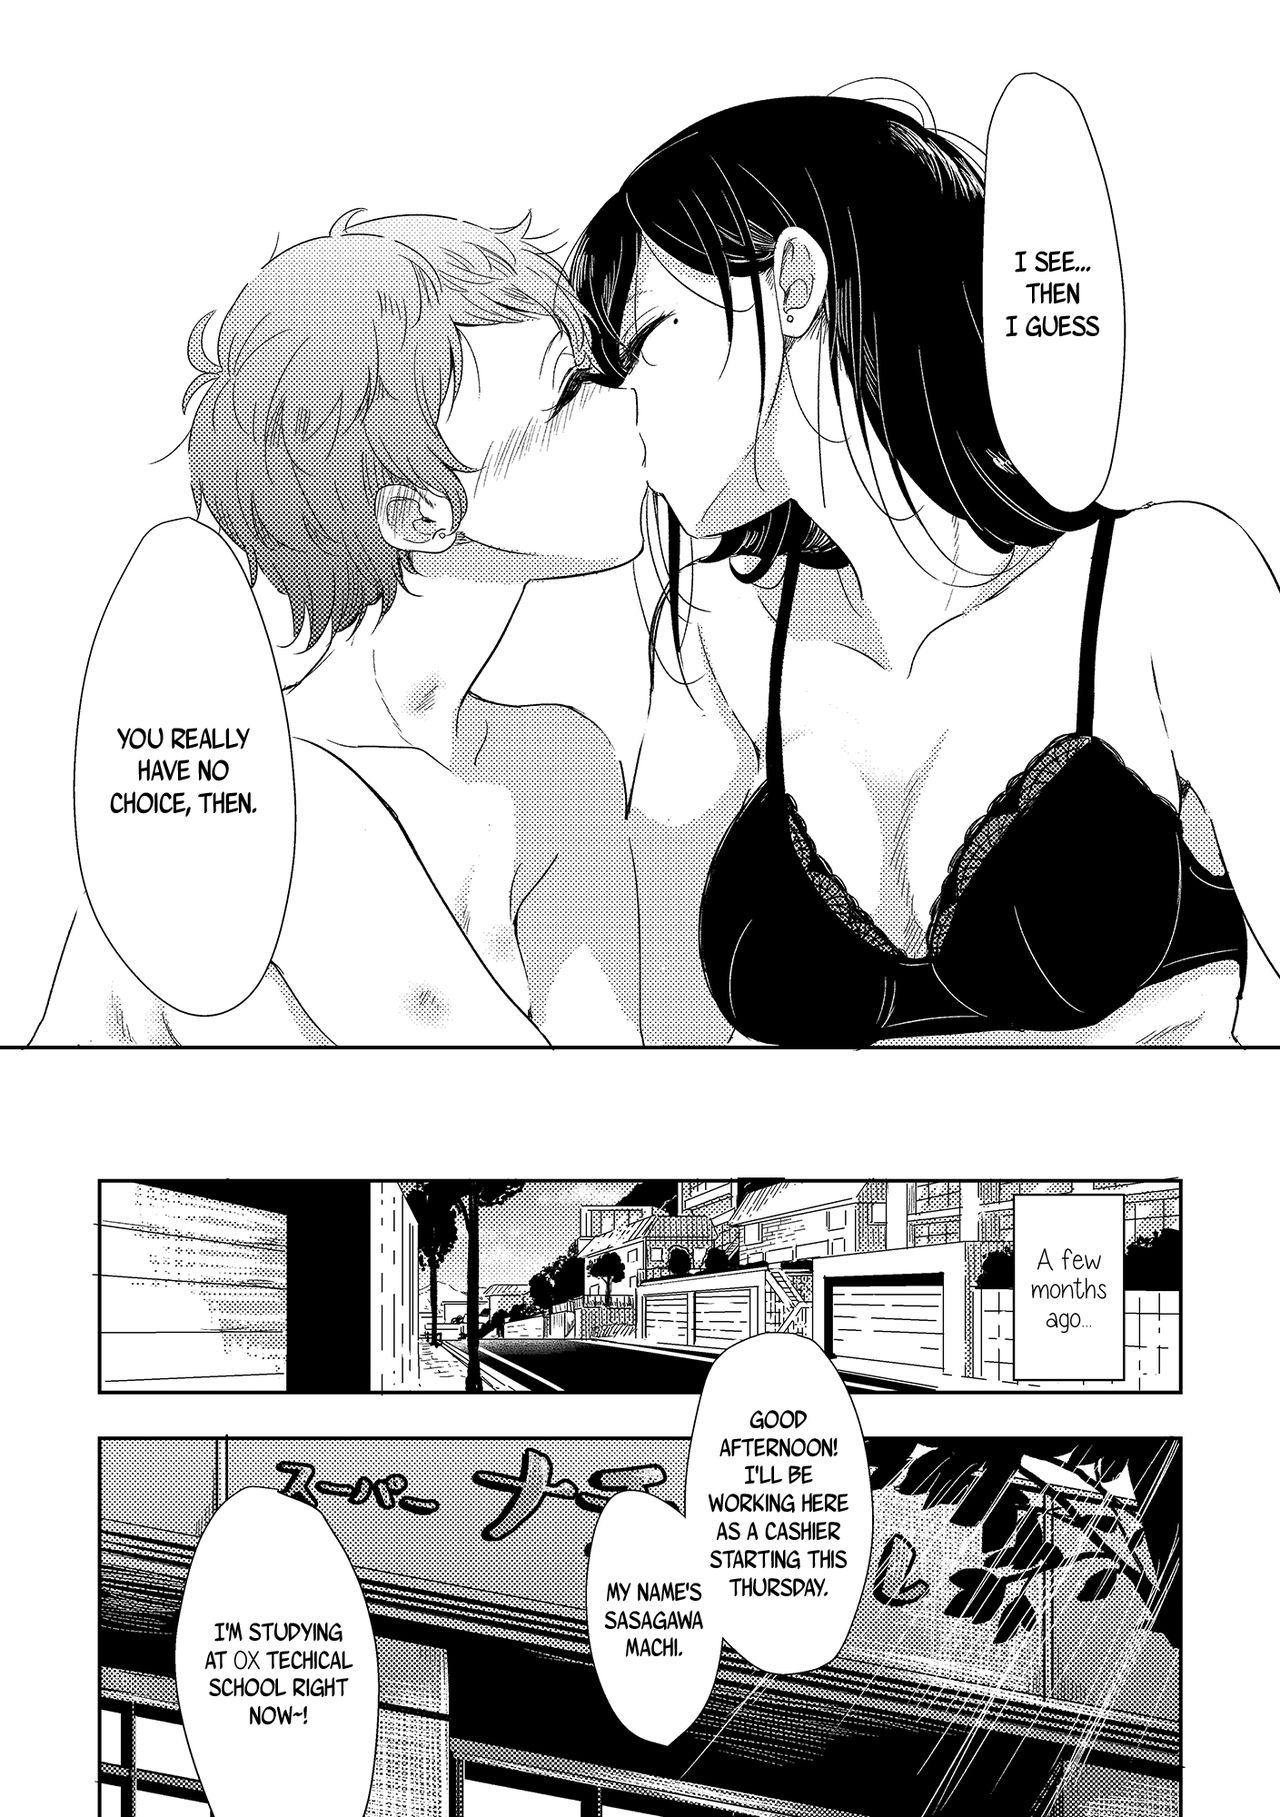 Whooty The Mysterious Kamiura-san - Original Gay Clinic - Page 3